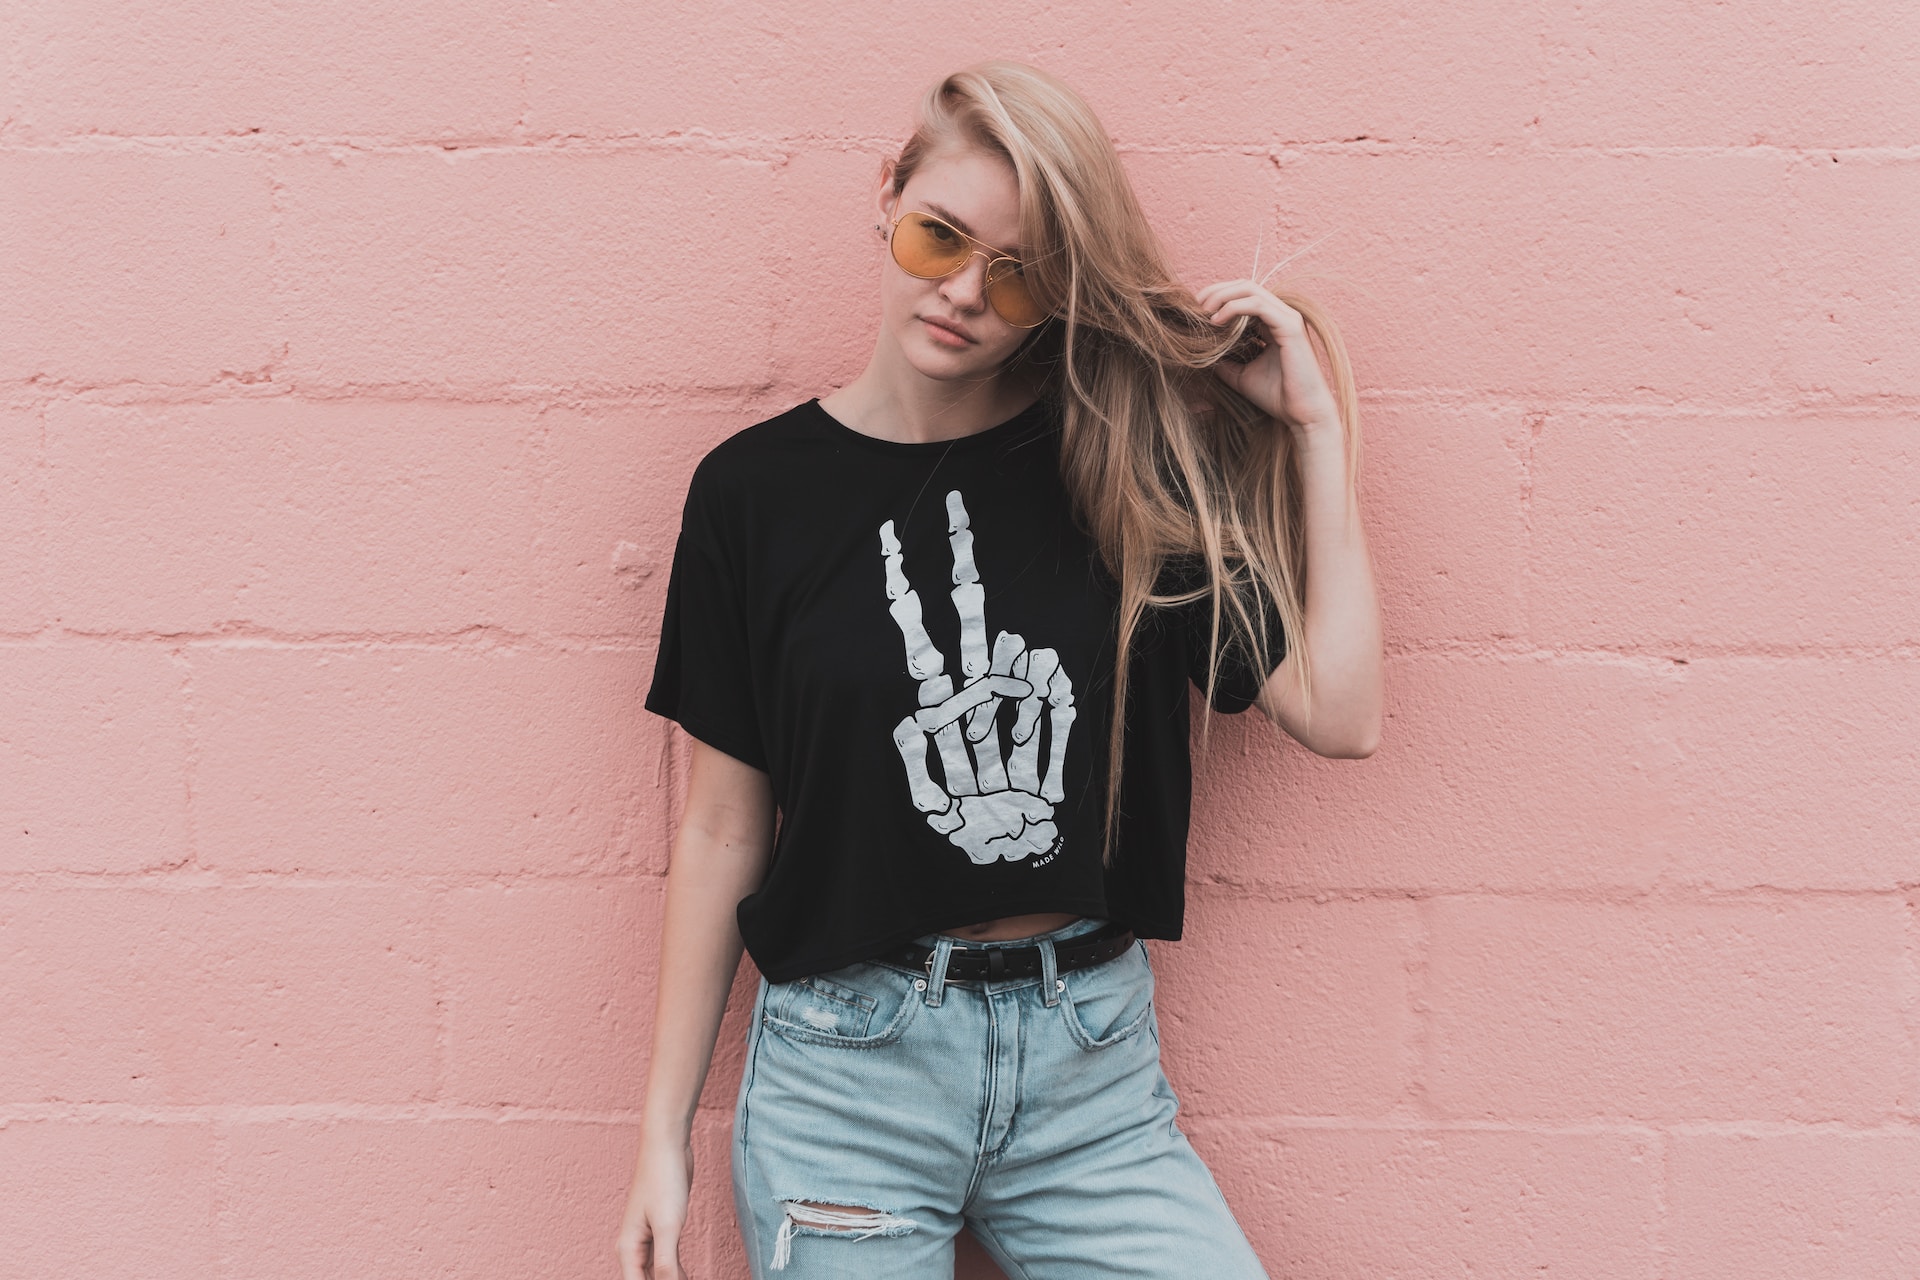 A young woman with long blonde hair wearing a black cropped t shirt with a skeleton hand doing a peace sign standing against a pink brick wall